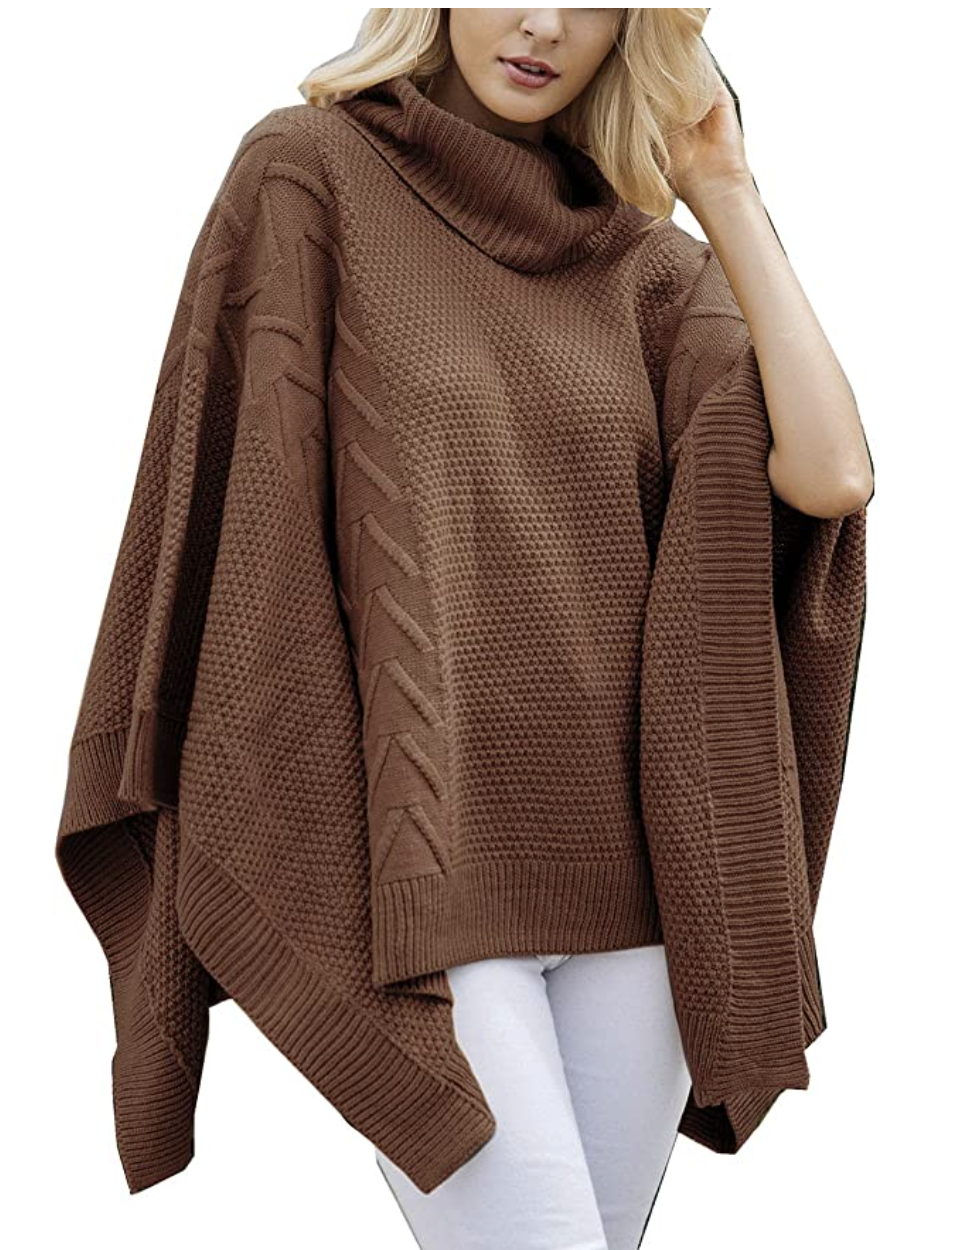 BerryGo Women's Chic Turtleneck Batwing Sleeve Asymmetric Knitted Poncho (Brown)